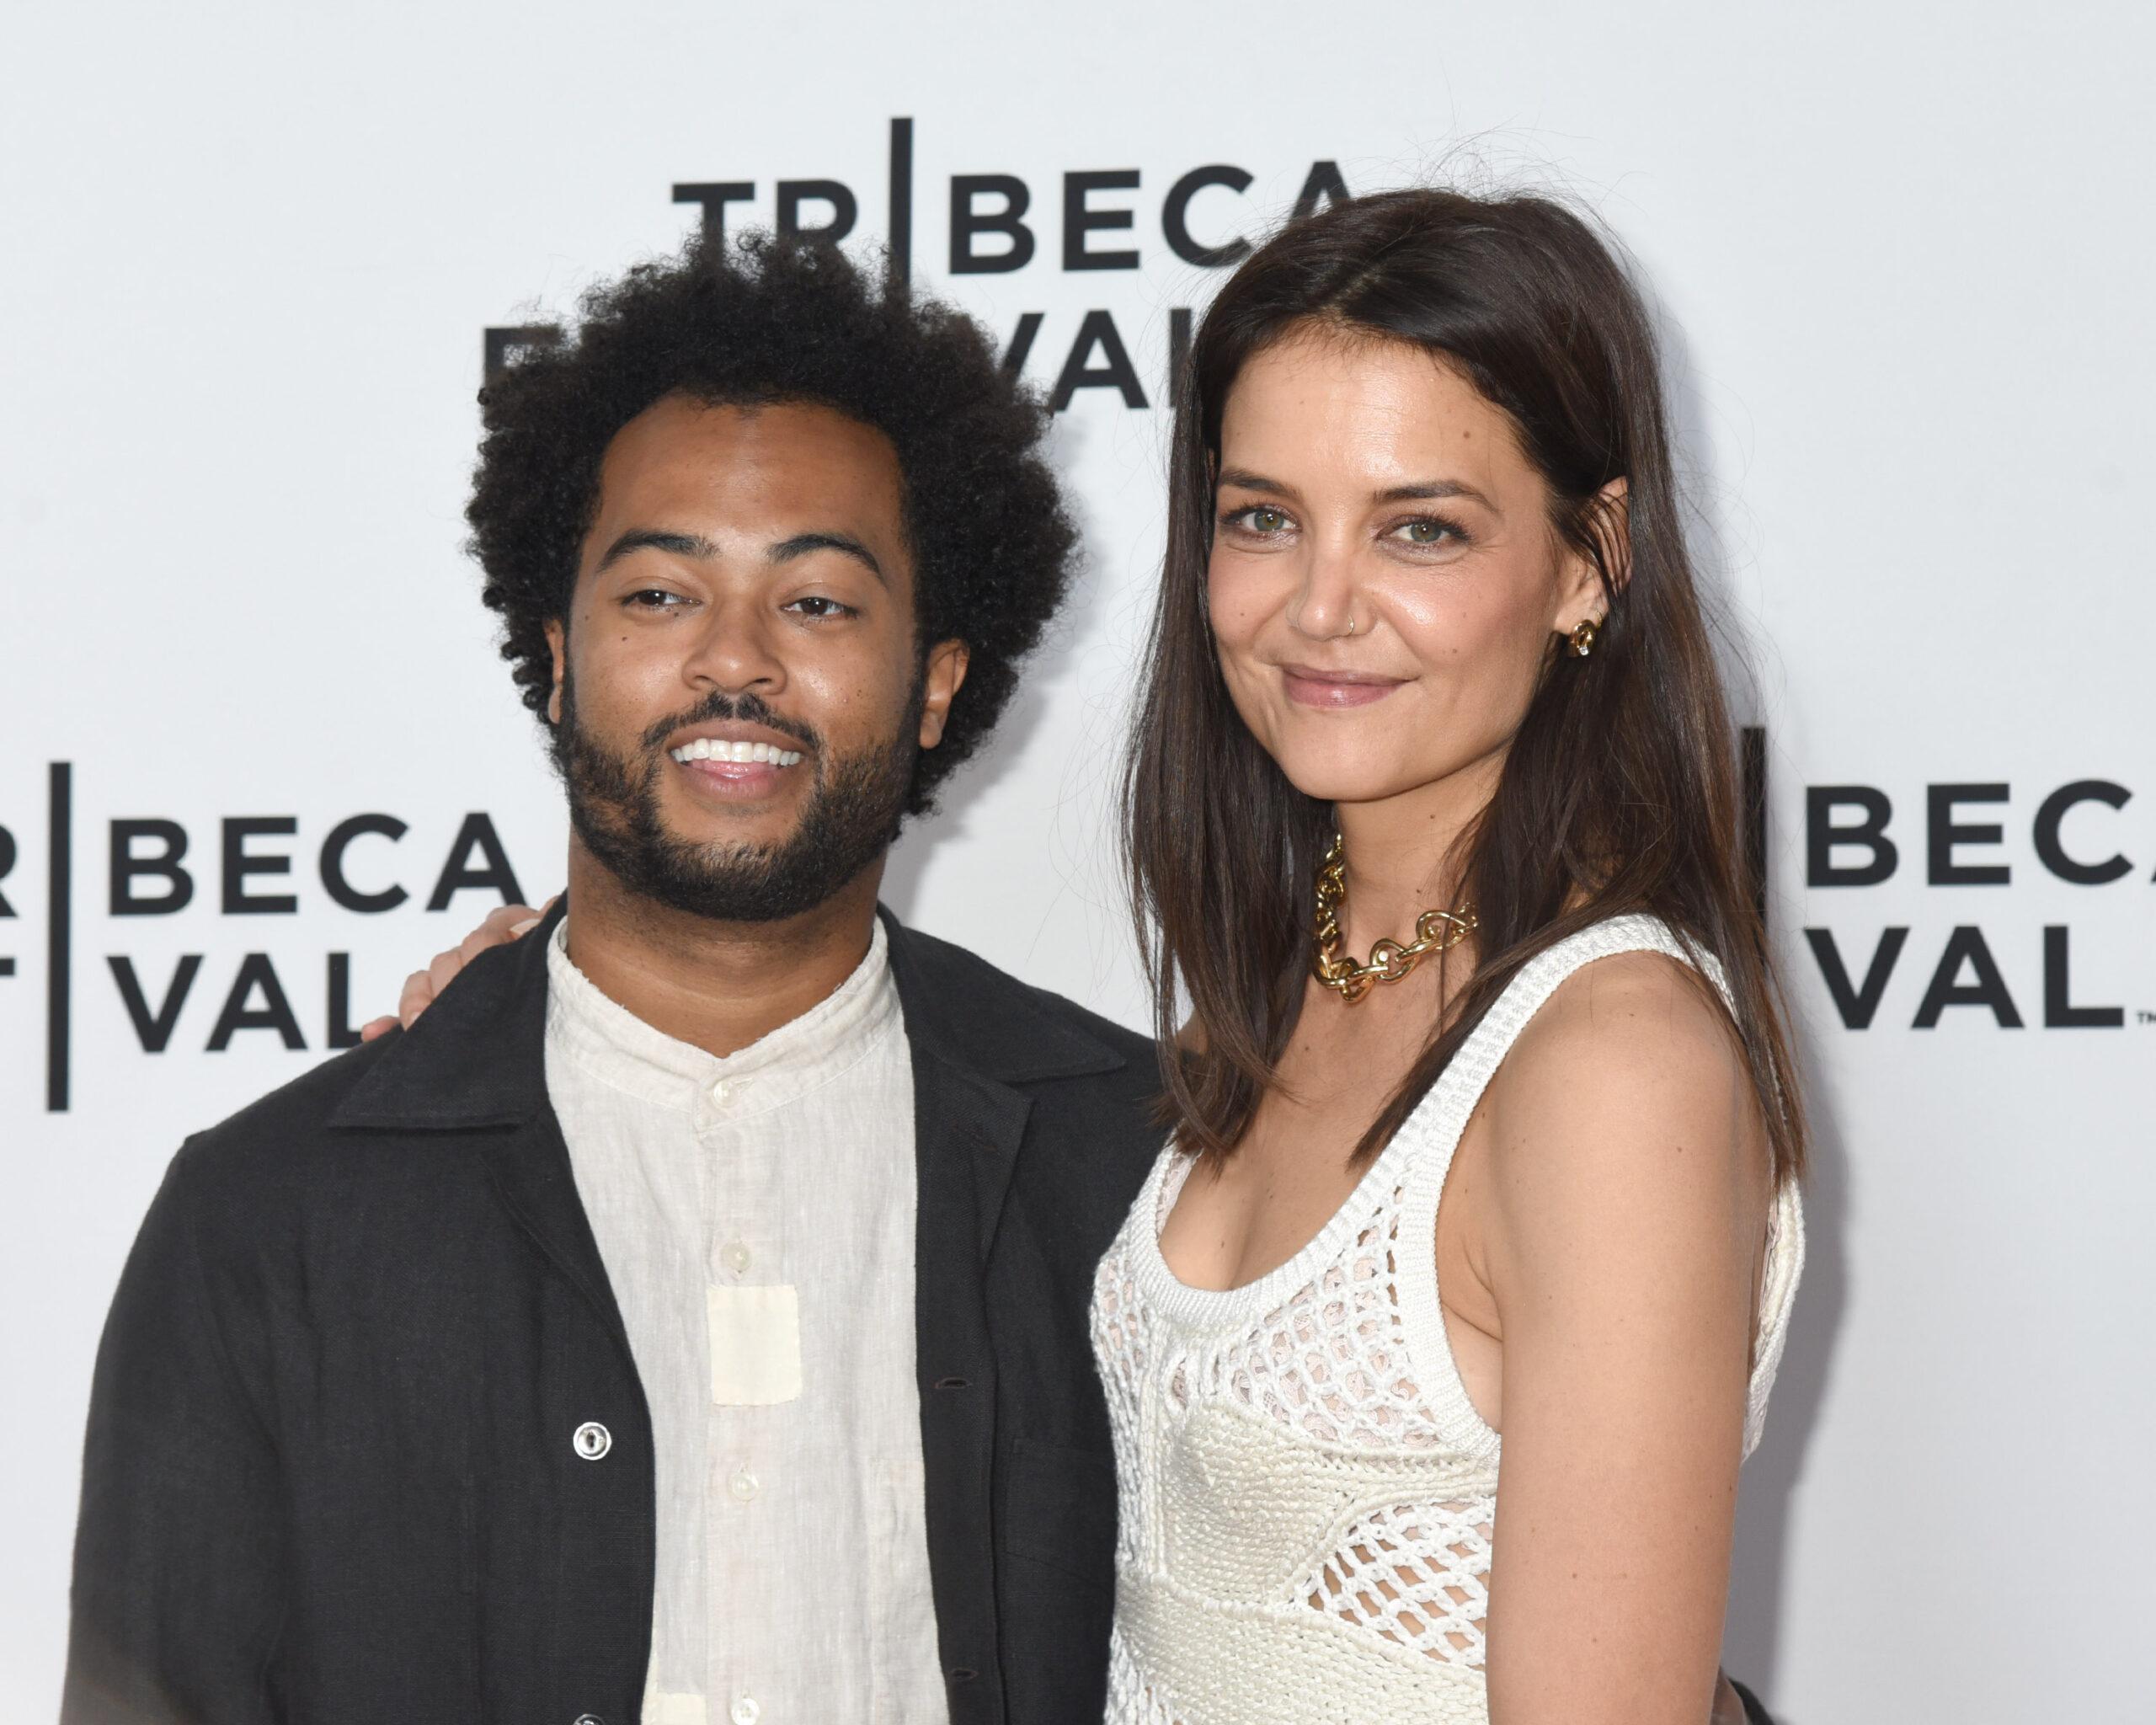 2022 Tribeca Film Festival World Premiere of "ALONE TOGETHER”, at the SVA Theater 1 Silas in New York, New York, USA, 14 June 2022. 14 Jun 2022 Pictured: Bobby Wooten III and Katie Holmes. 